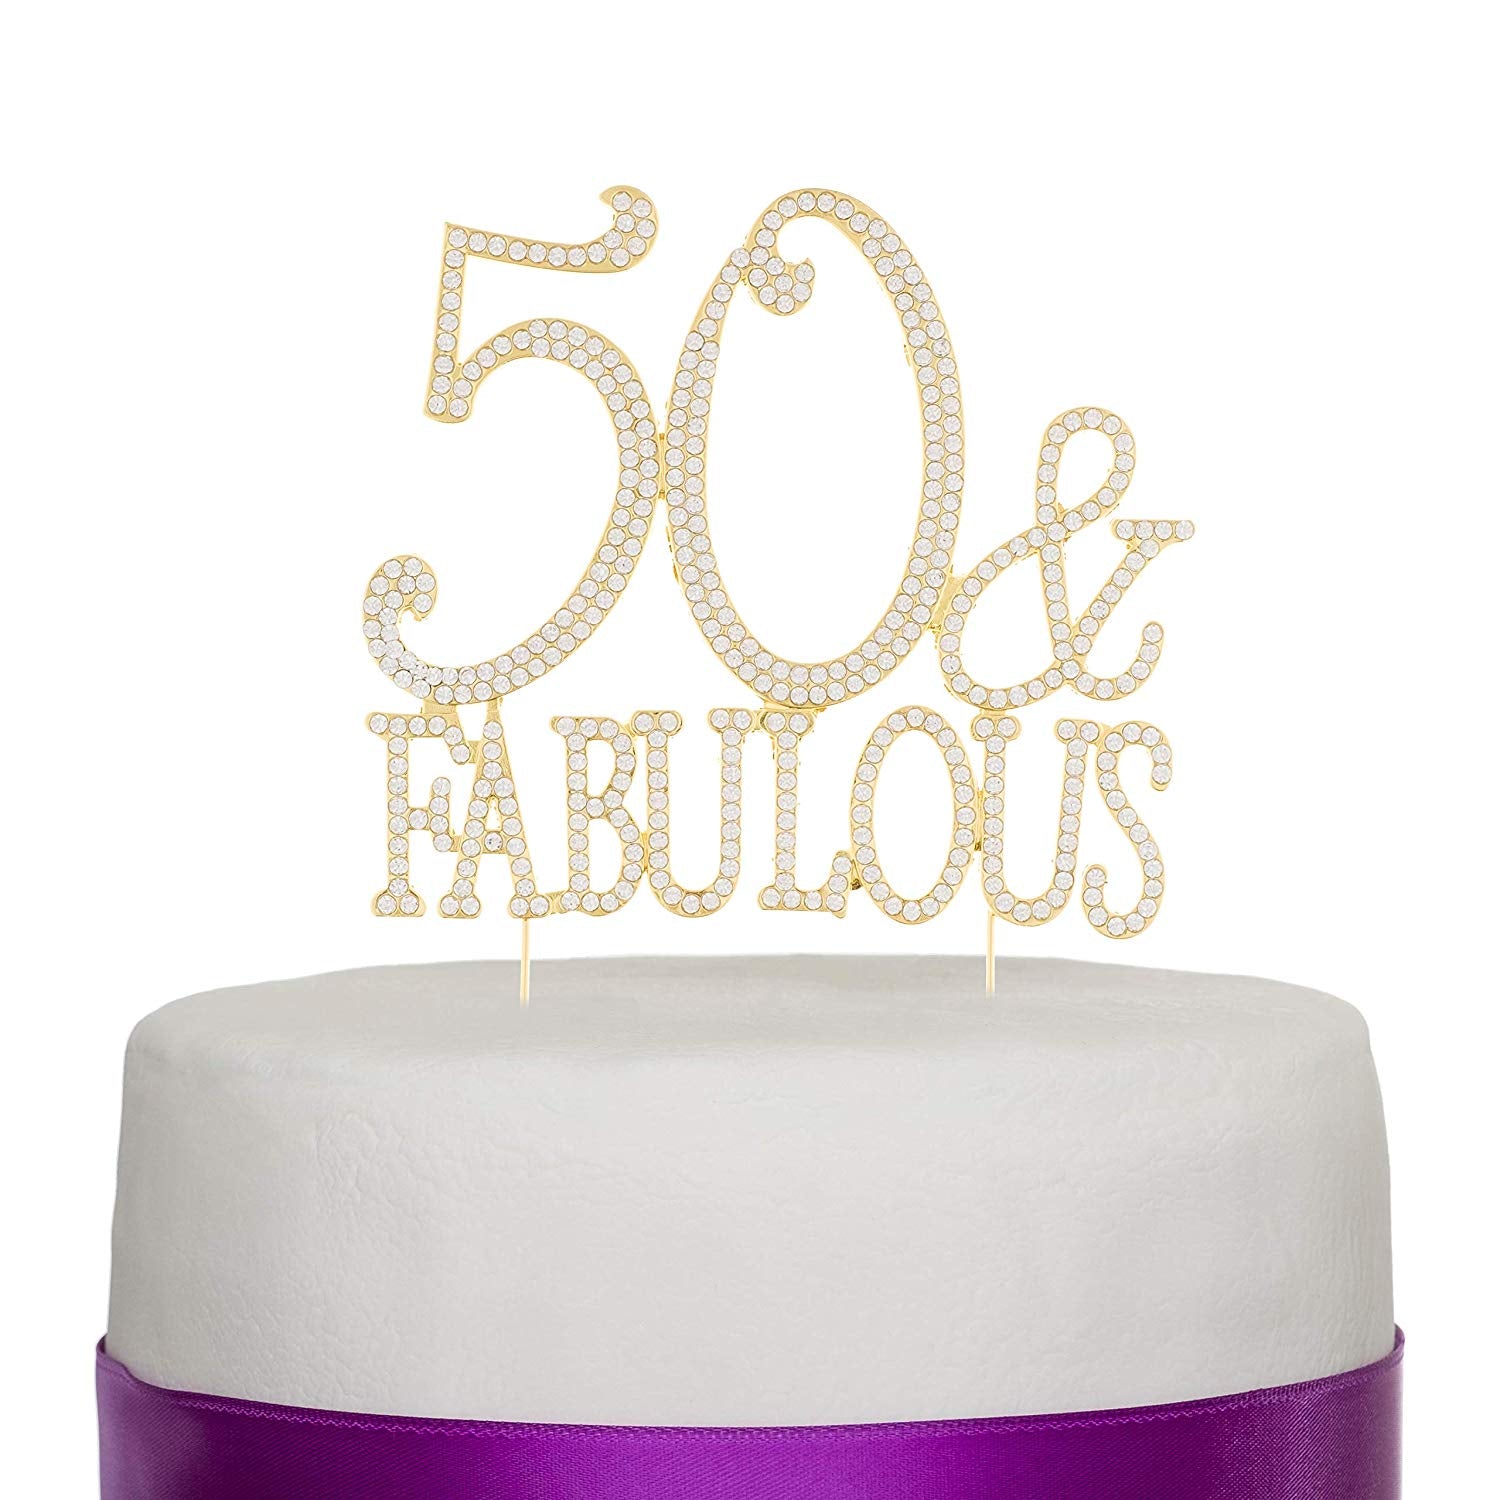 Happy 50th Birthday Cake Topper, Gold Glittery 50th Birthday Cake Topper, 50th  Birthday Candles, 50 Fabulous Cake Topper with Number 50 Candles for Women  Men 50th Birthday Decorations price in Saudi Arabia |